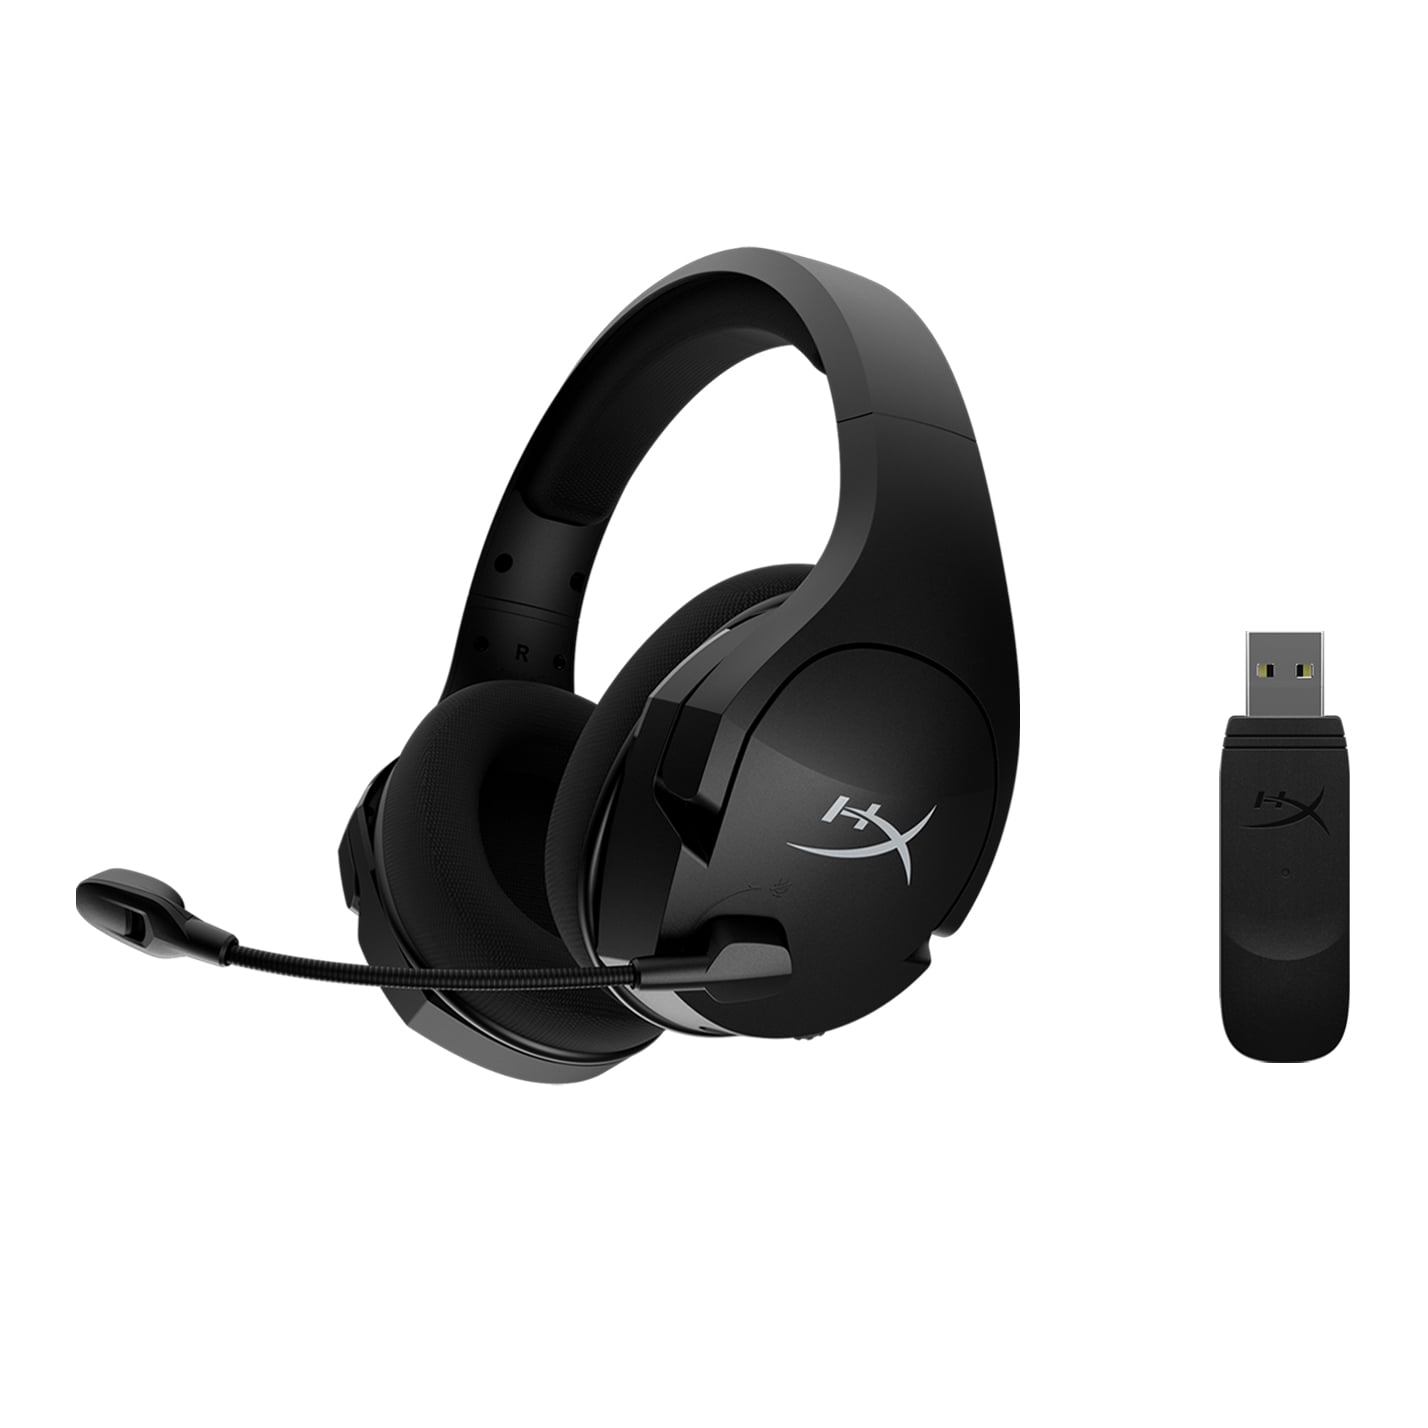 helikopter cerebrum Skraldespand HyperX Cloud Stinger Core - Wireless Gaming Headset, for PC, 7.1 Surround  Sound, Noise Cancelling Microphone, Lightweight - Walmart.com